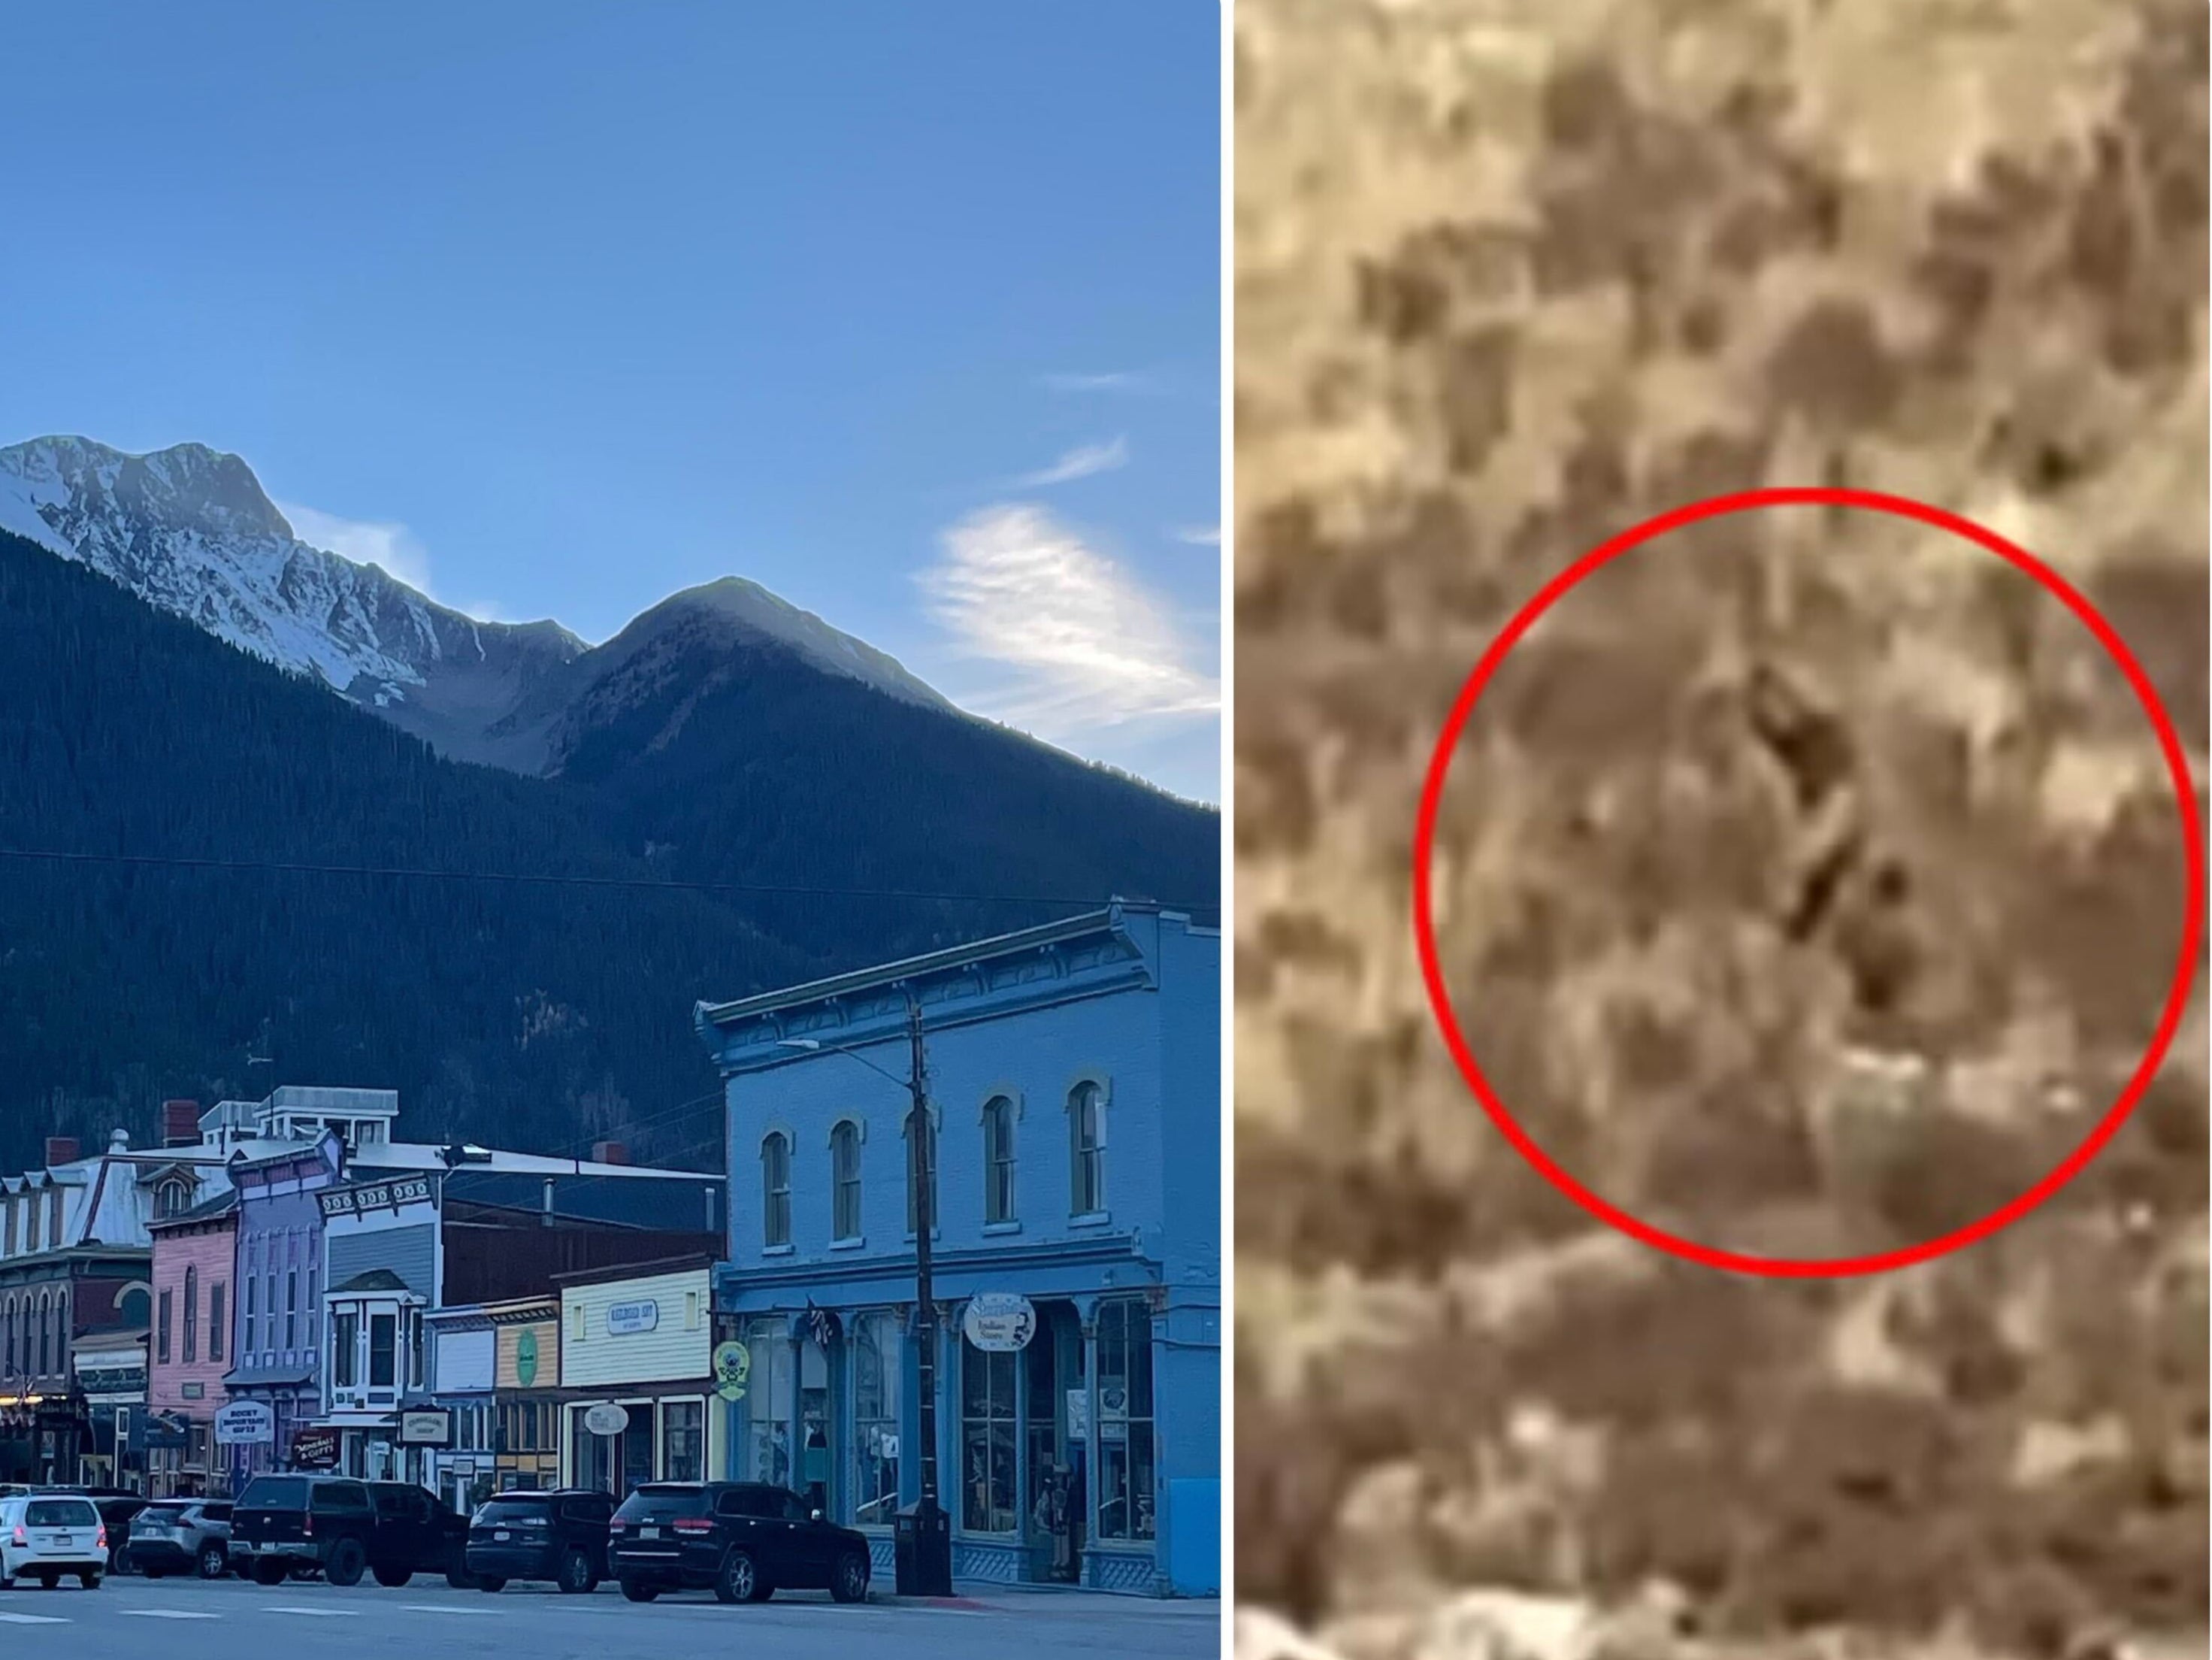 The tiny mountain enclave of Silverton, Colorado has found itself at the centre of viral Bigfoot fame after tourists captured footage of a hairy, large figure from the region’s famed scenic train